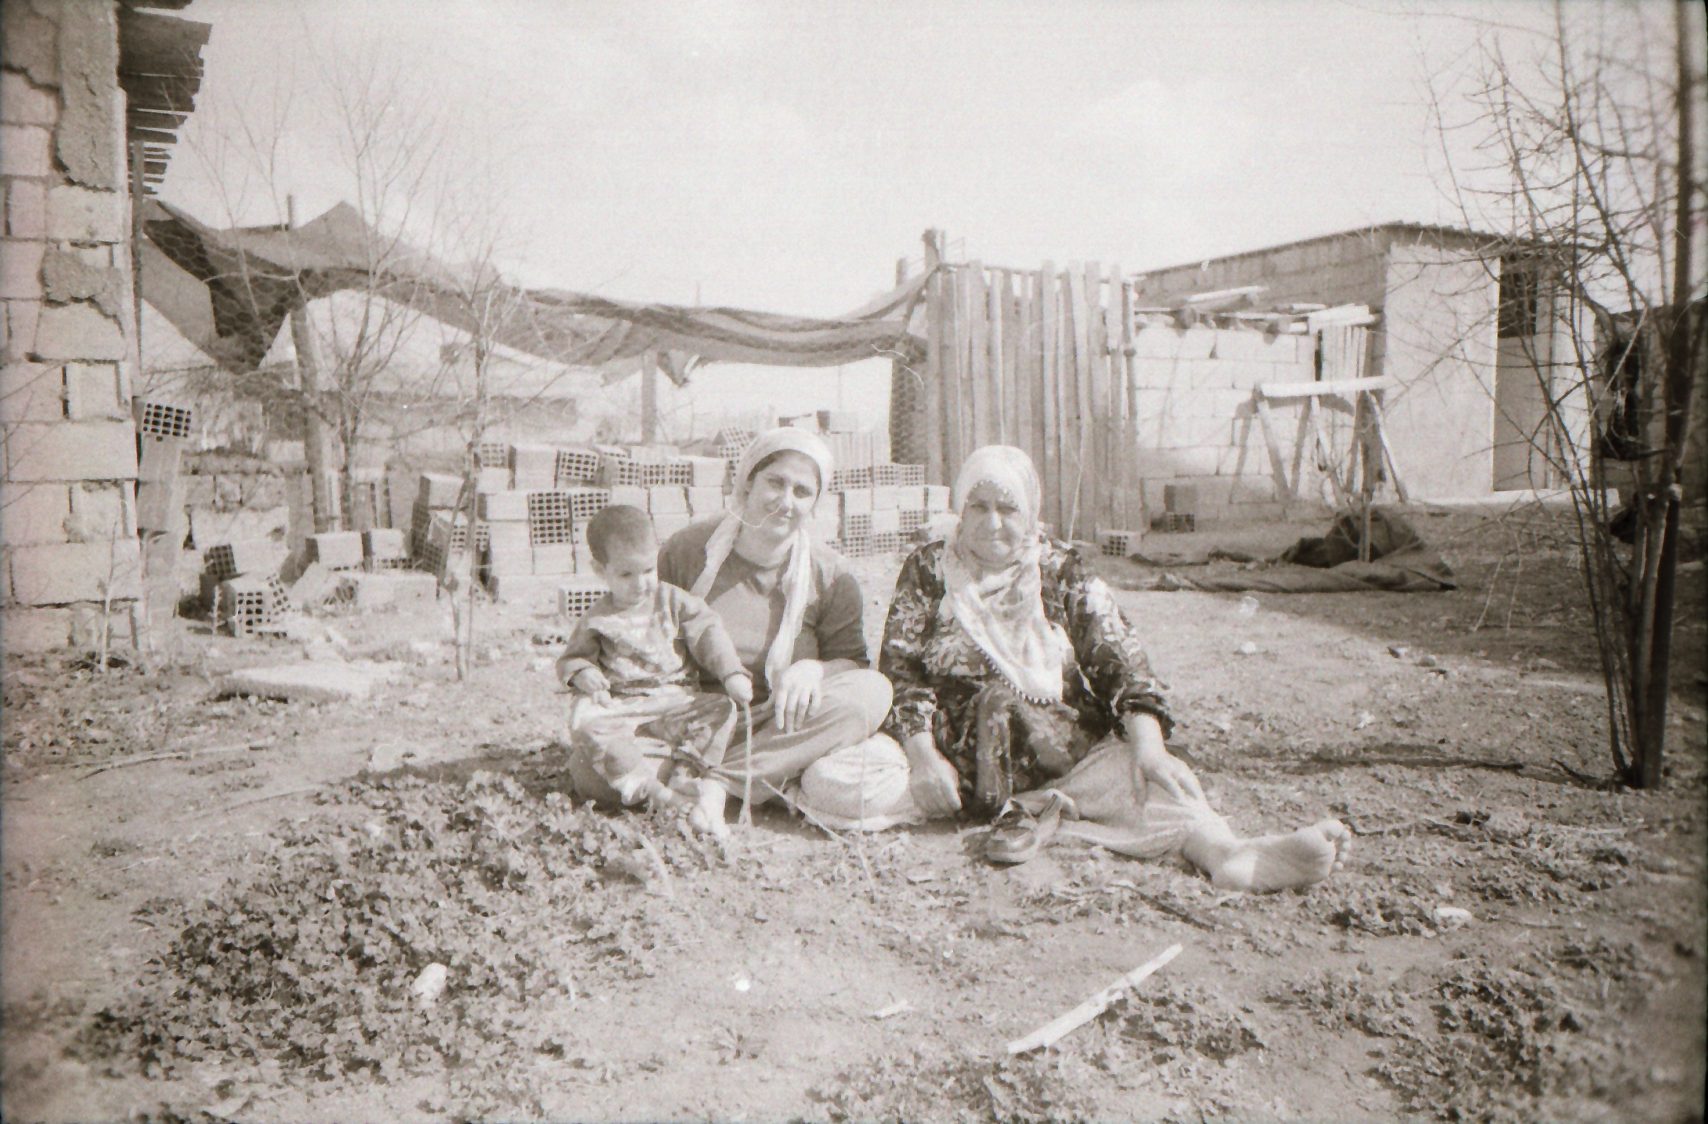 Women and child relaxing in yard (Pic: Courtesy Sirkhane Darkroom)